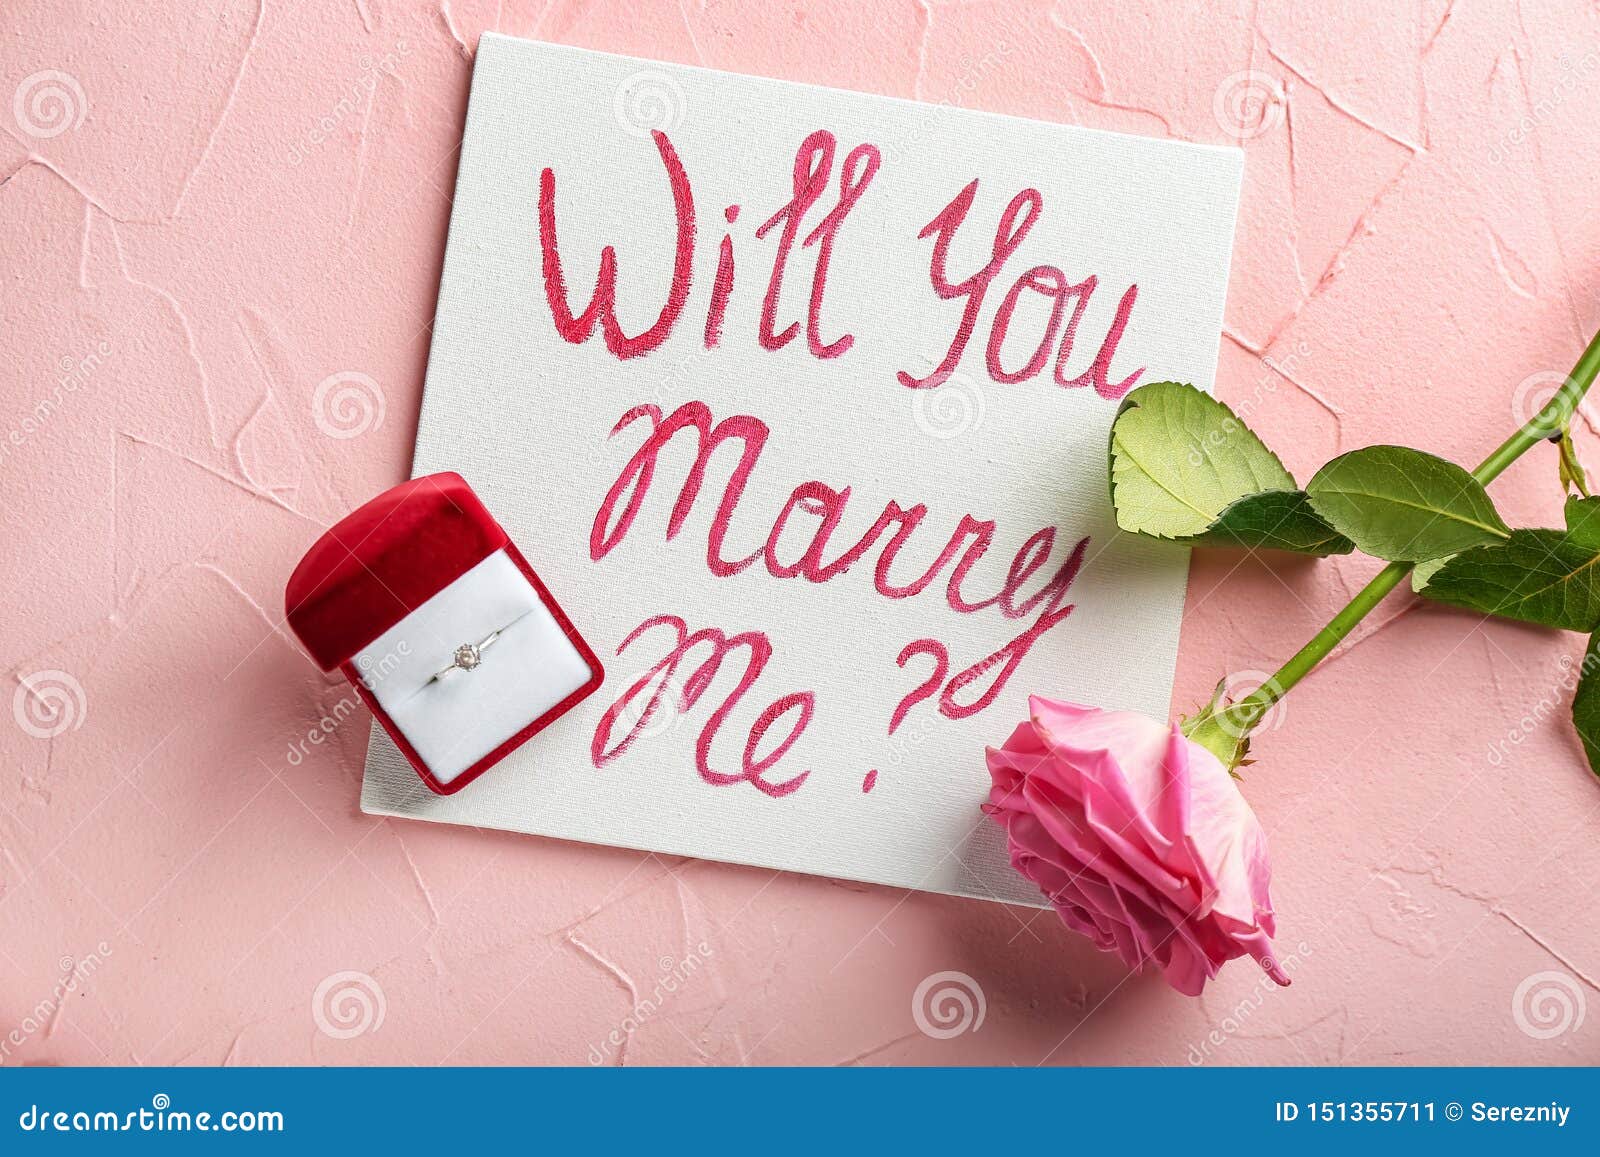 Me marry sms u will Will You